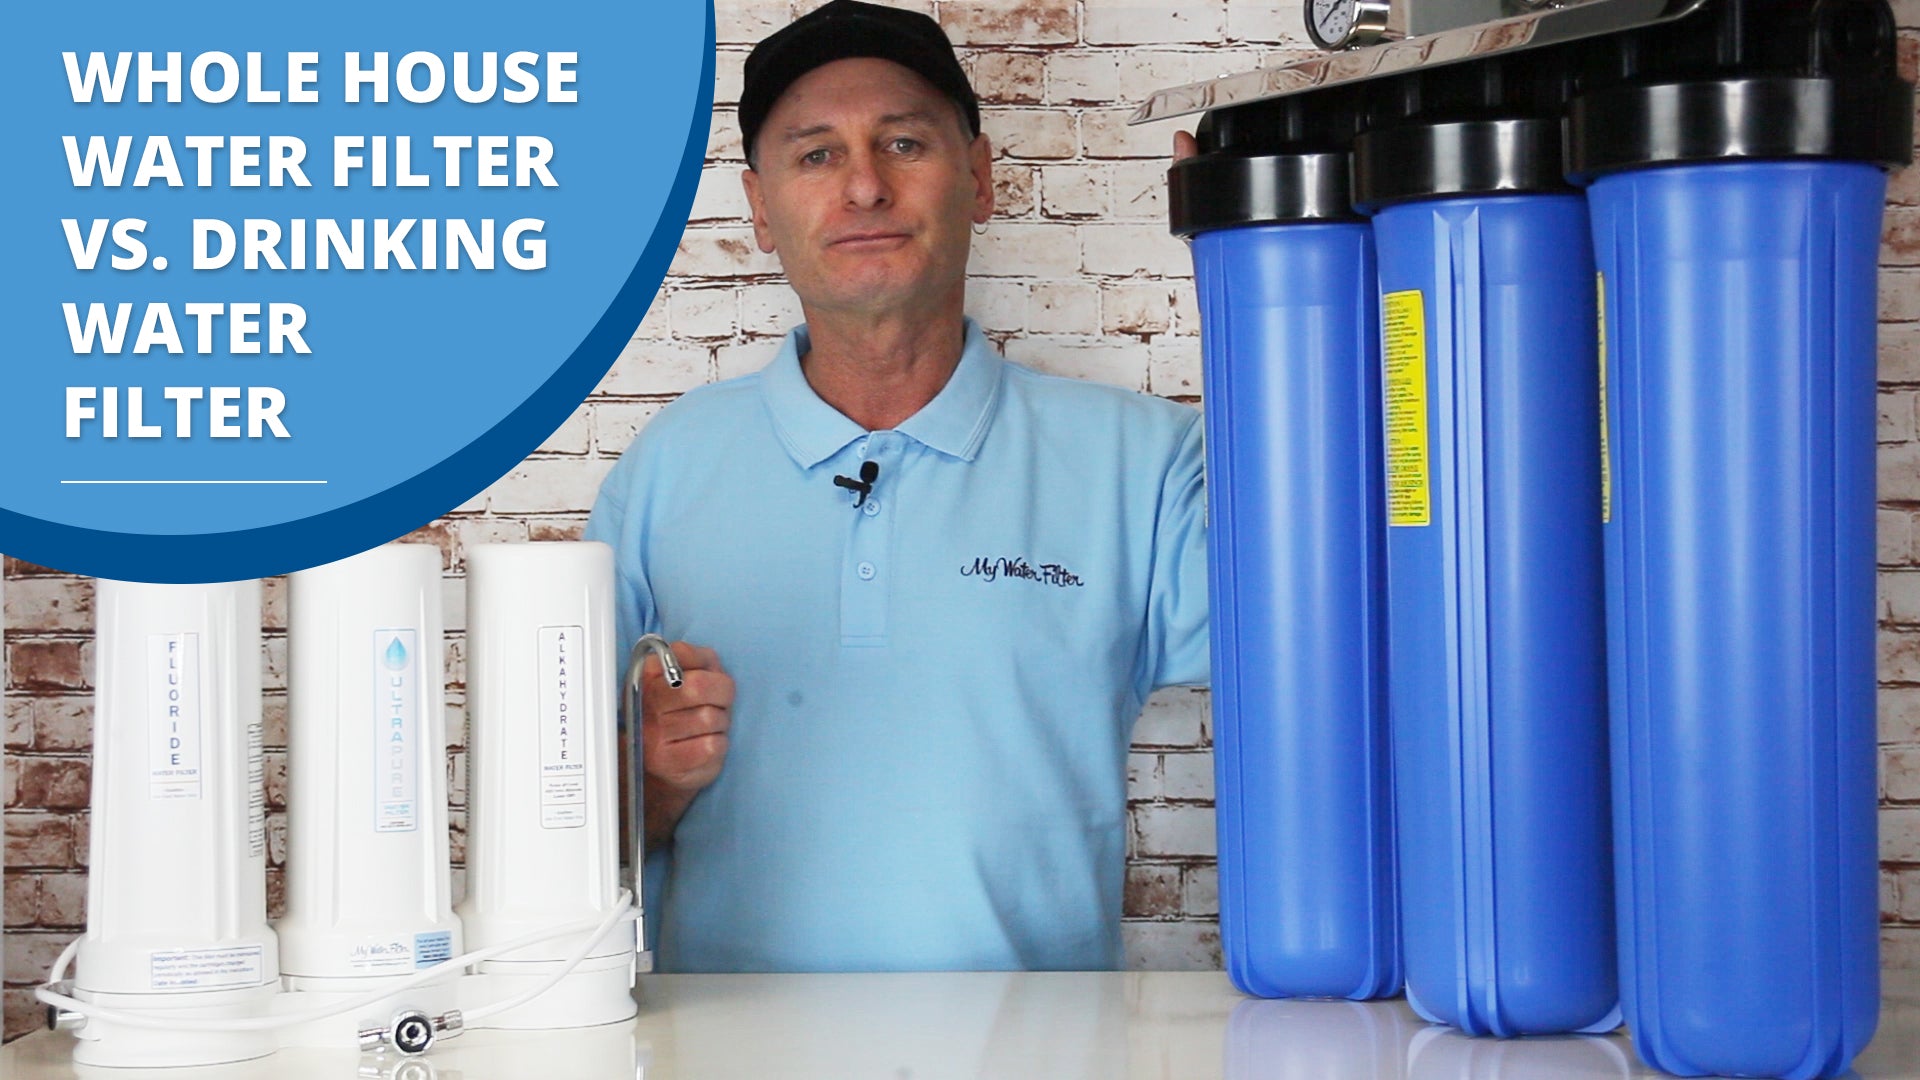 [VIDEO] Water Filter Comparison - Whole House Water Filter Vs. Drinking Water Filter